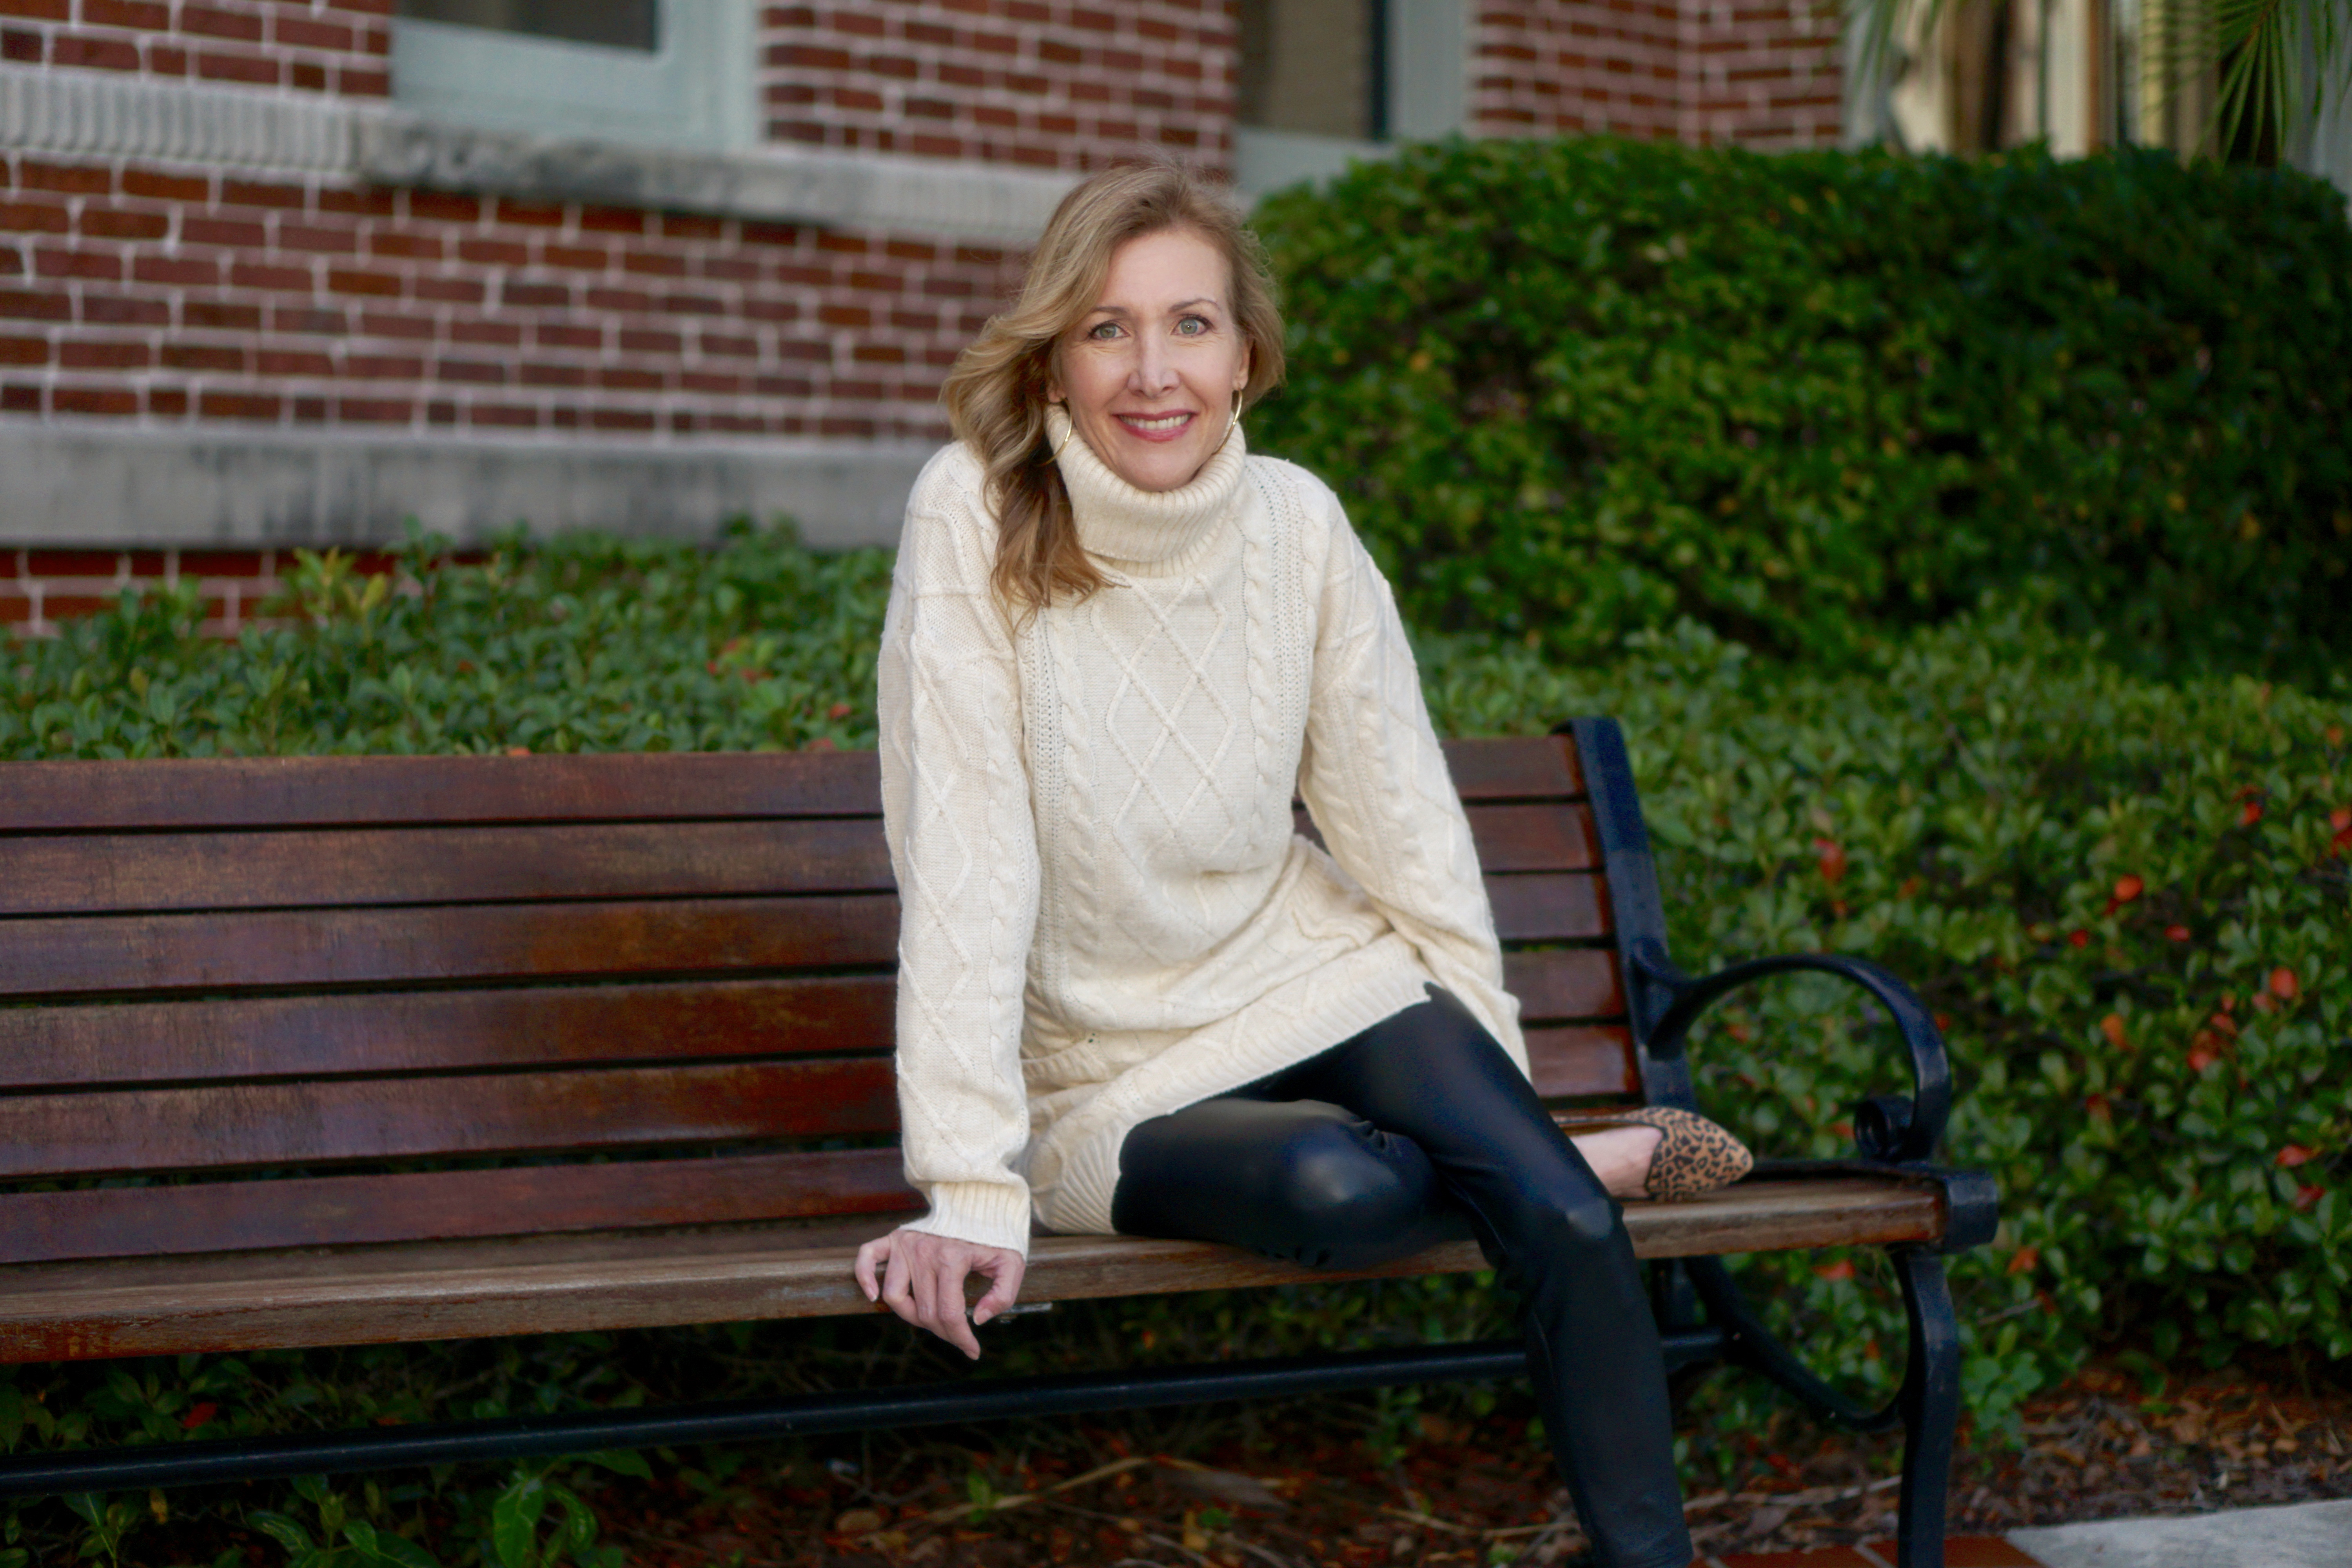 Woman wearing cream colored knit sweater sitting on a bench